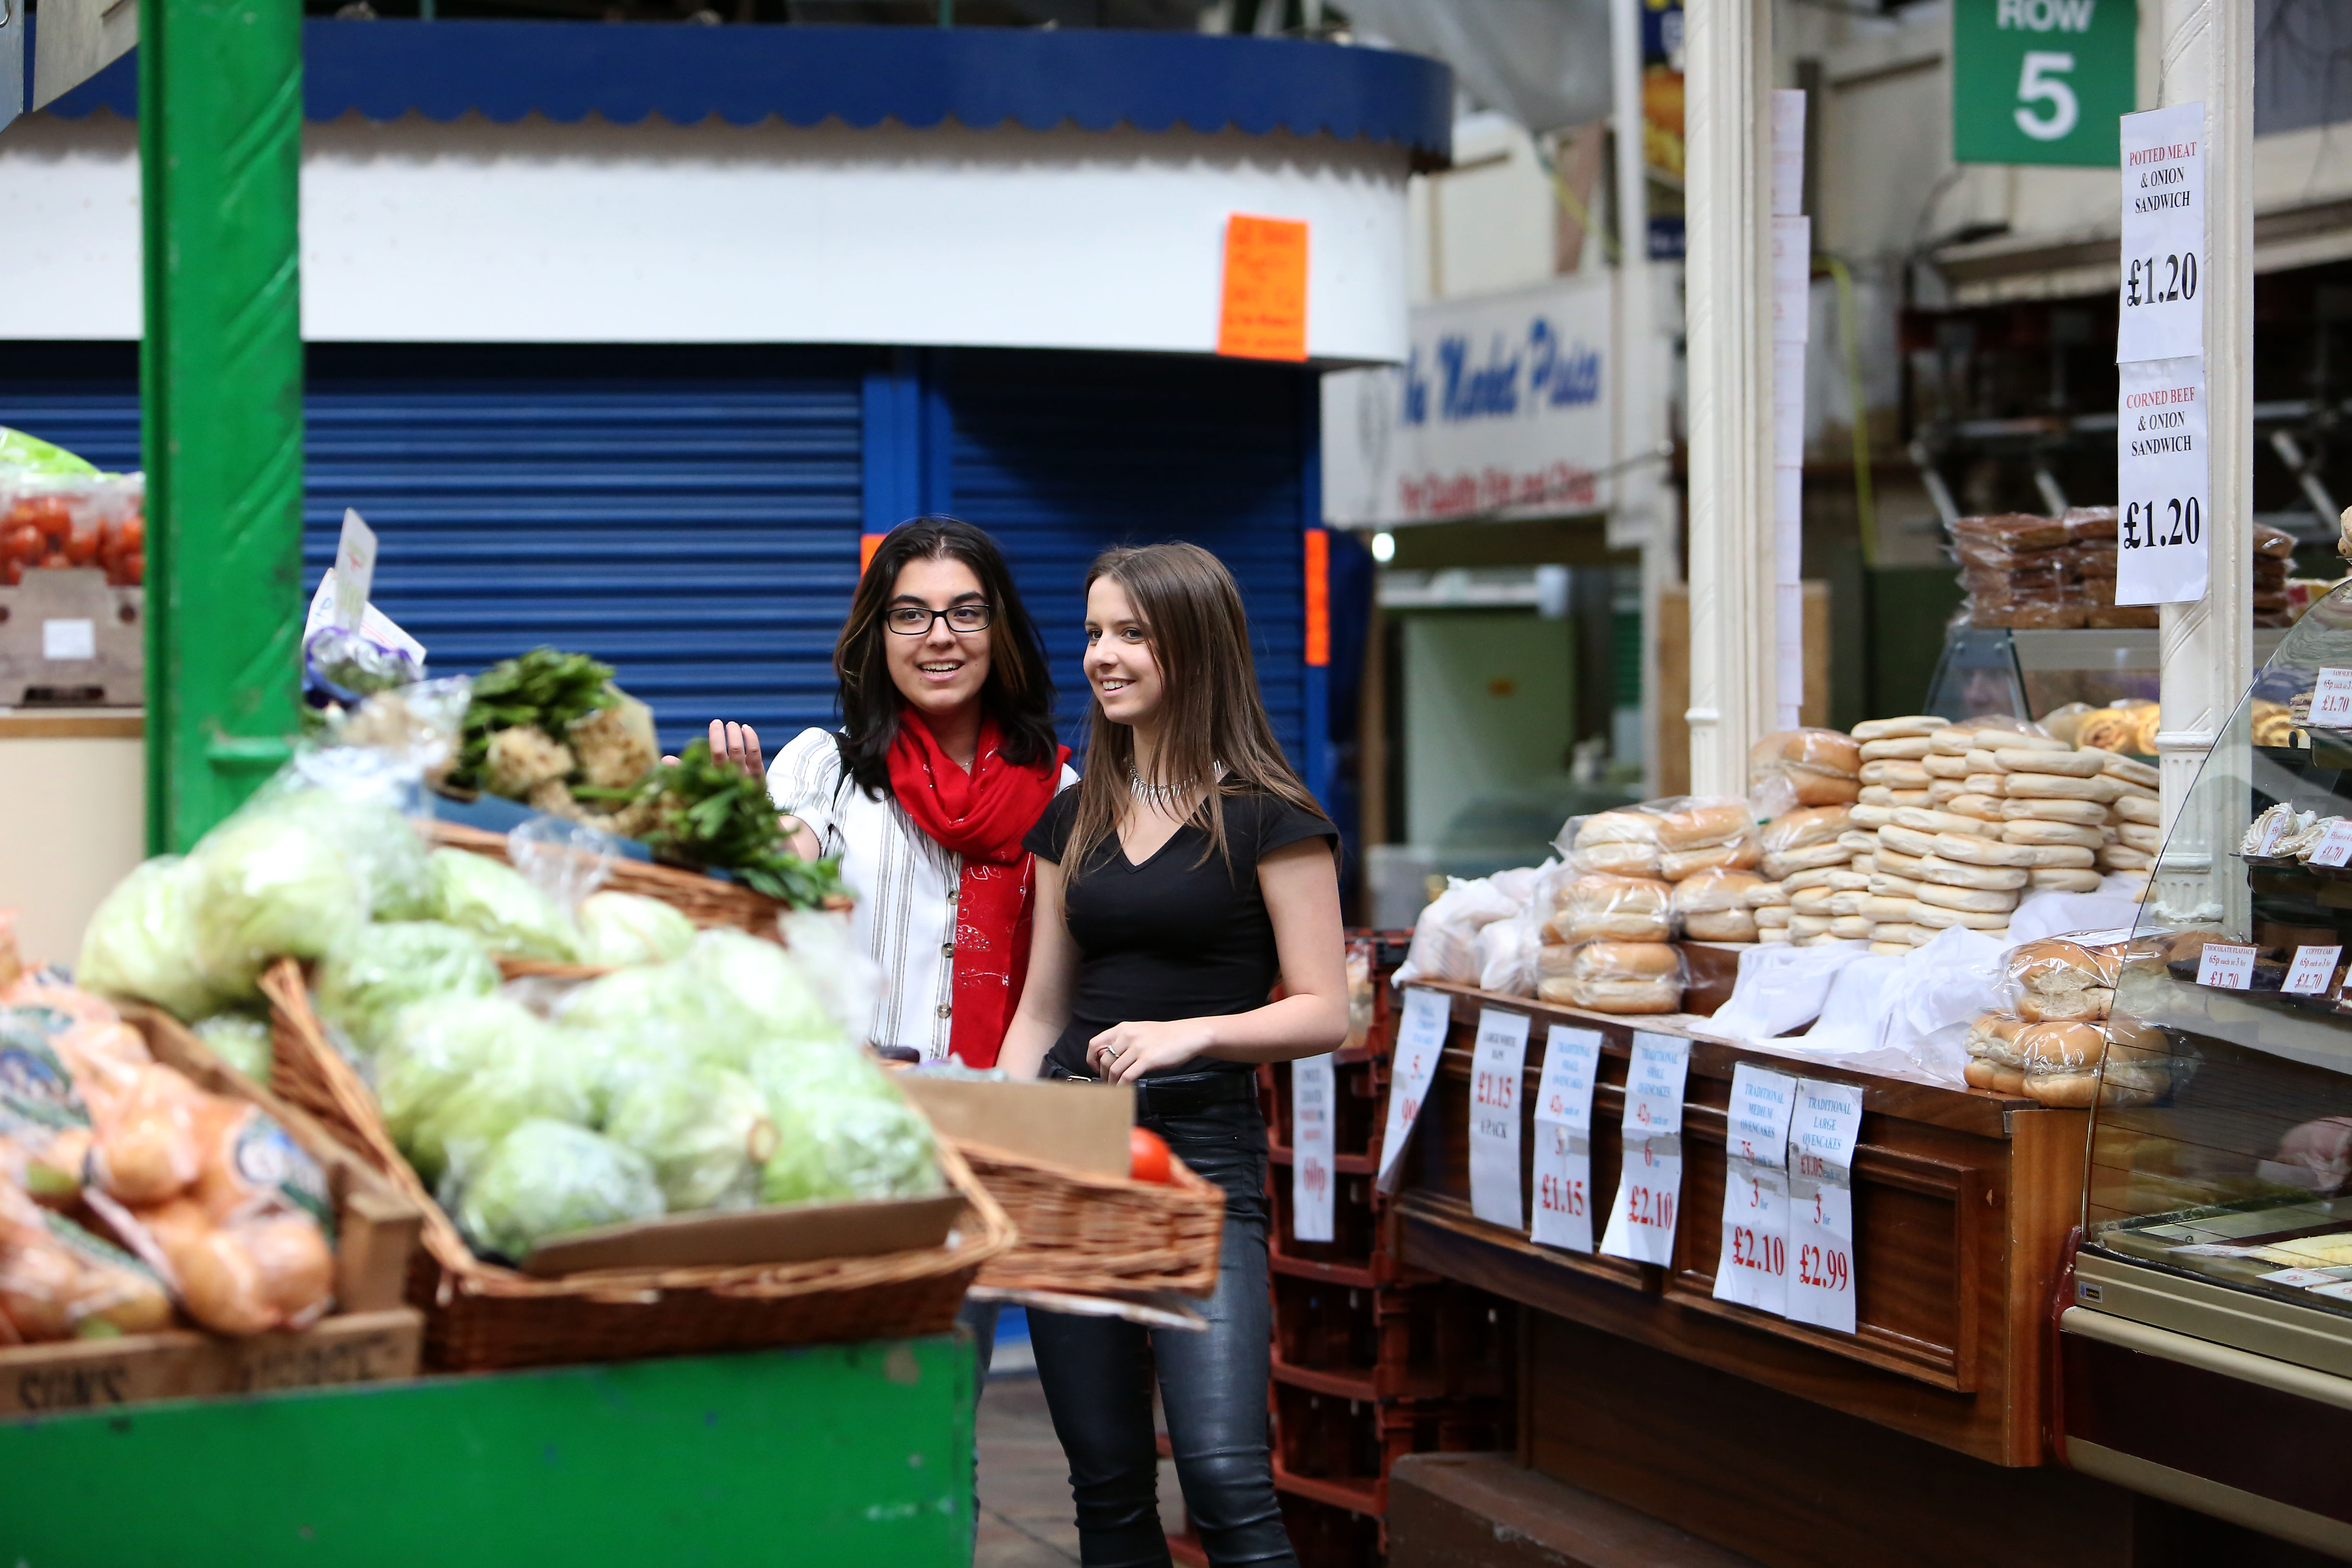 Two people at a produce stall in Leeds Kirkgate Markets.